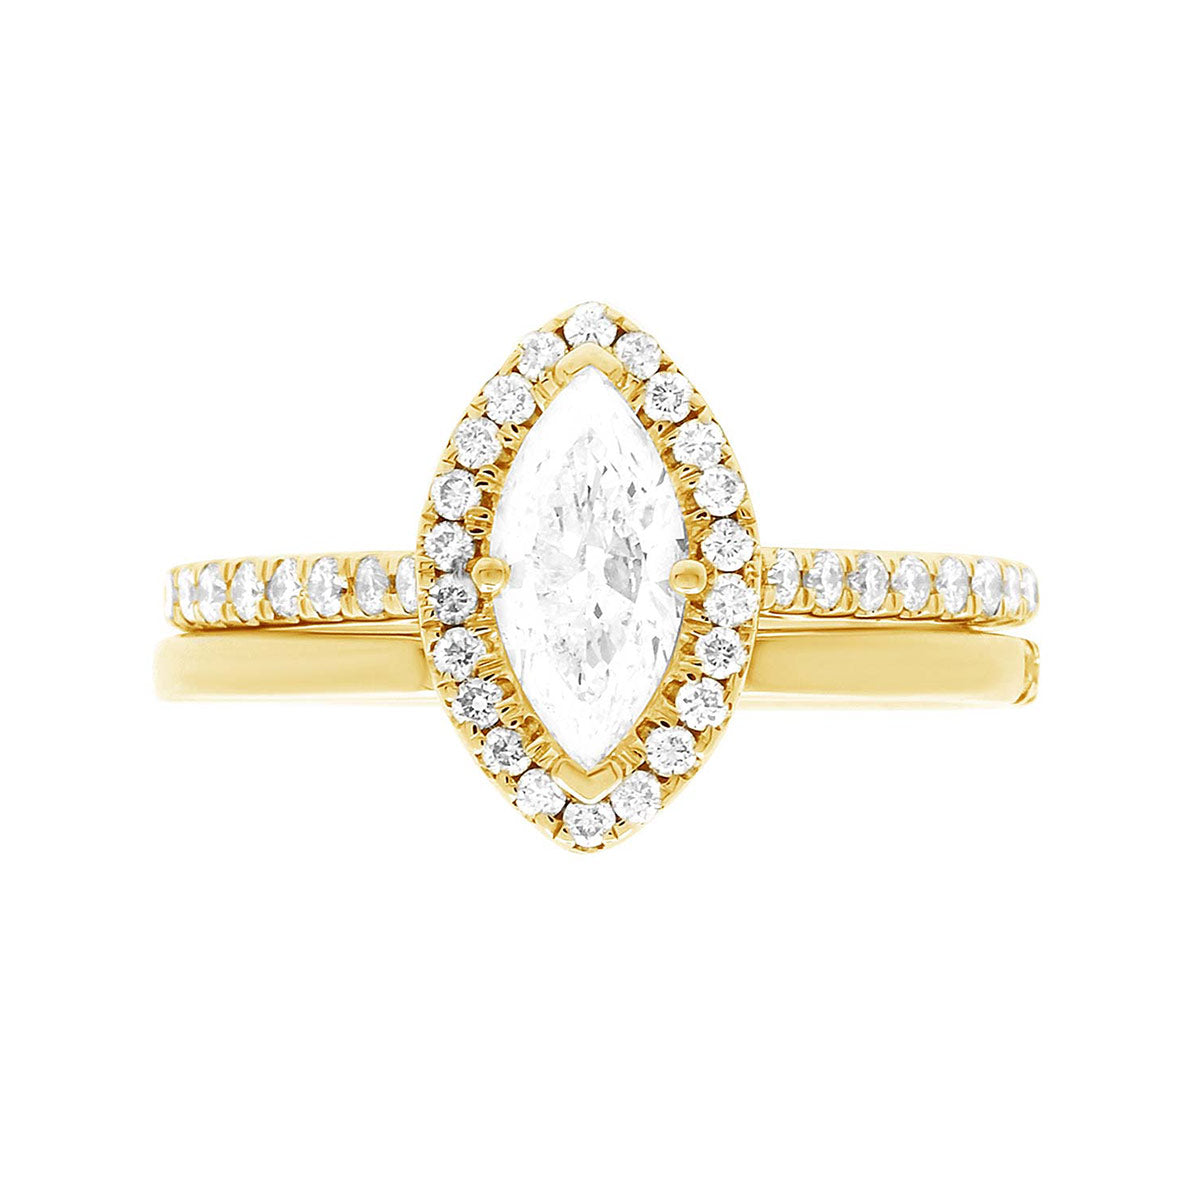 Marquise Halo Engagement Ring in yellow gold pictured with a matching wedding ring